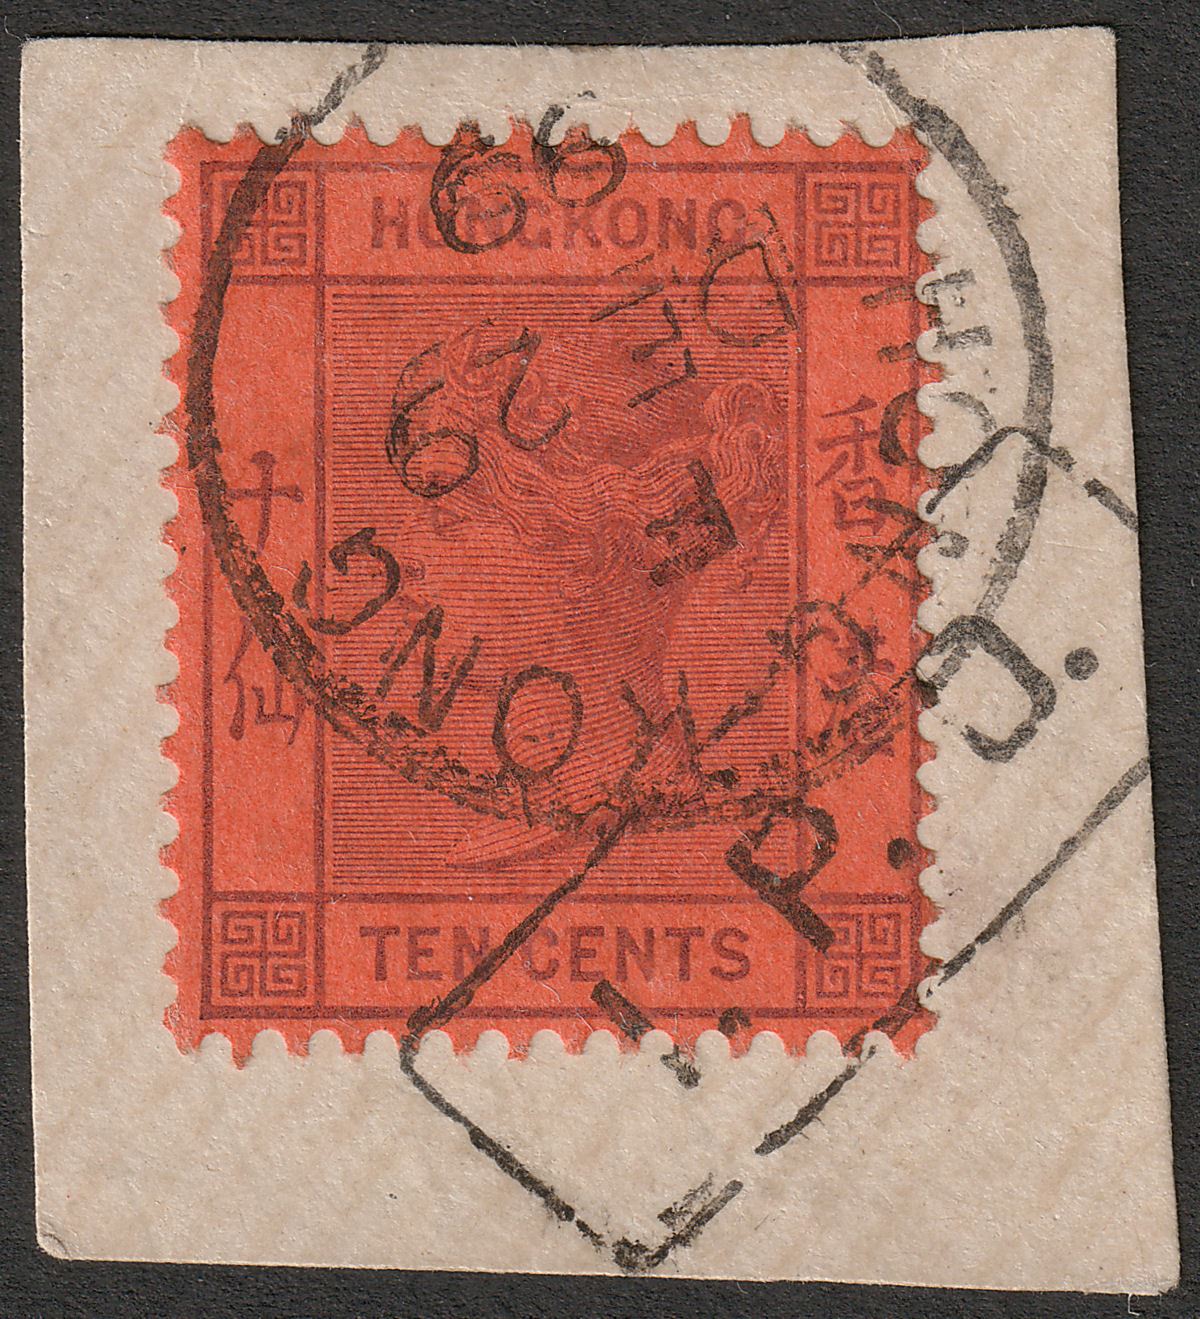 Hong Kong 1899 QV 10c Used on Piece with HK code F Postmark + Amoy IPO Mark